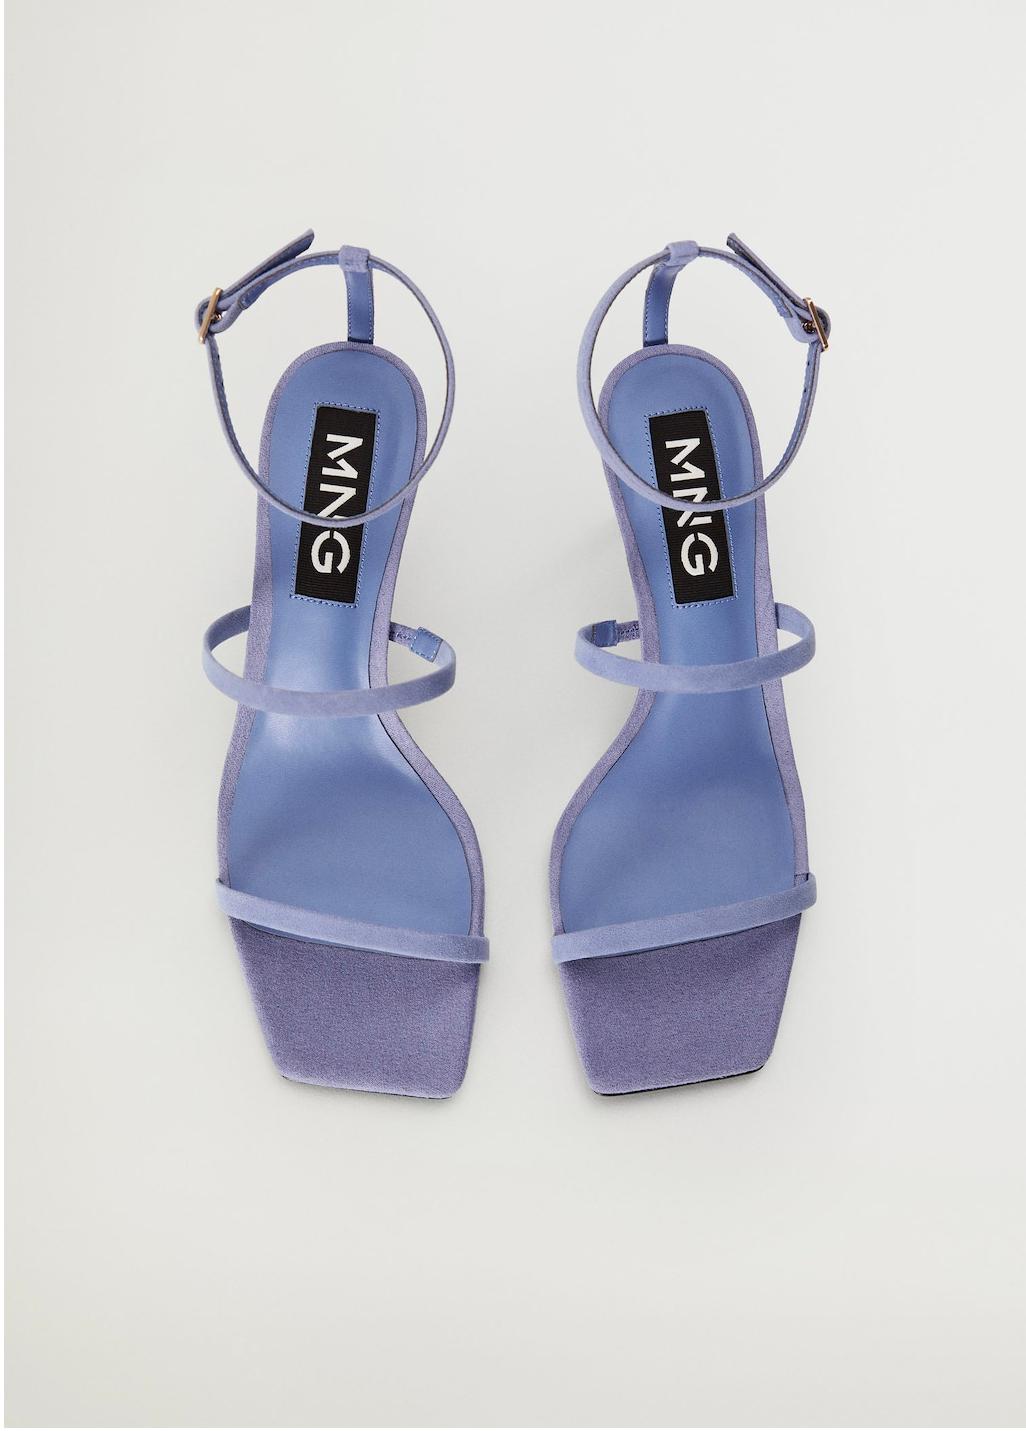 Mango Mango 3D sandals joins a Biscay firm to create the most desired sandals